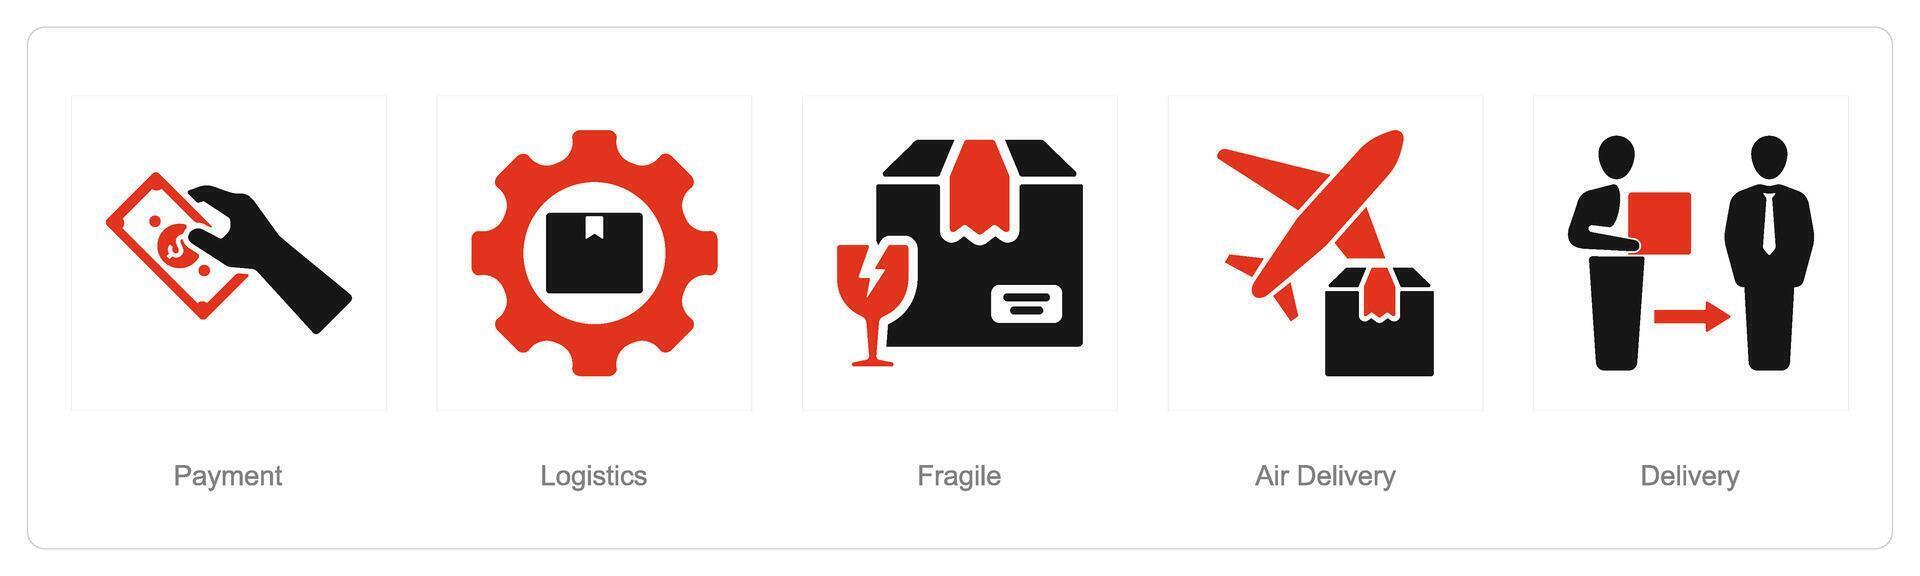 A set of 5 delivery icons as parcel, fragile, delivery process vector